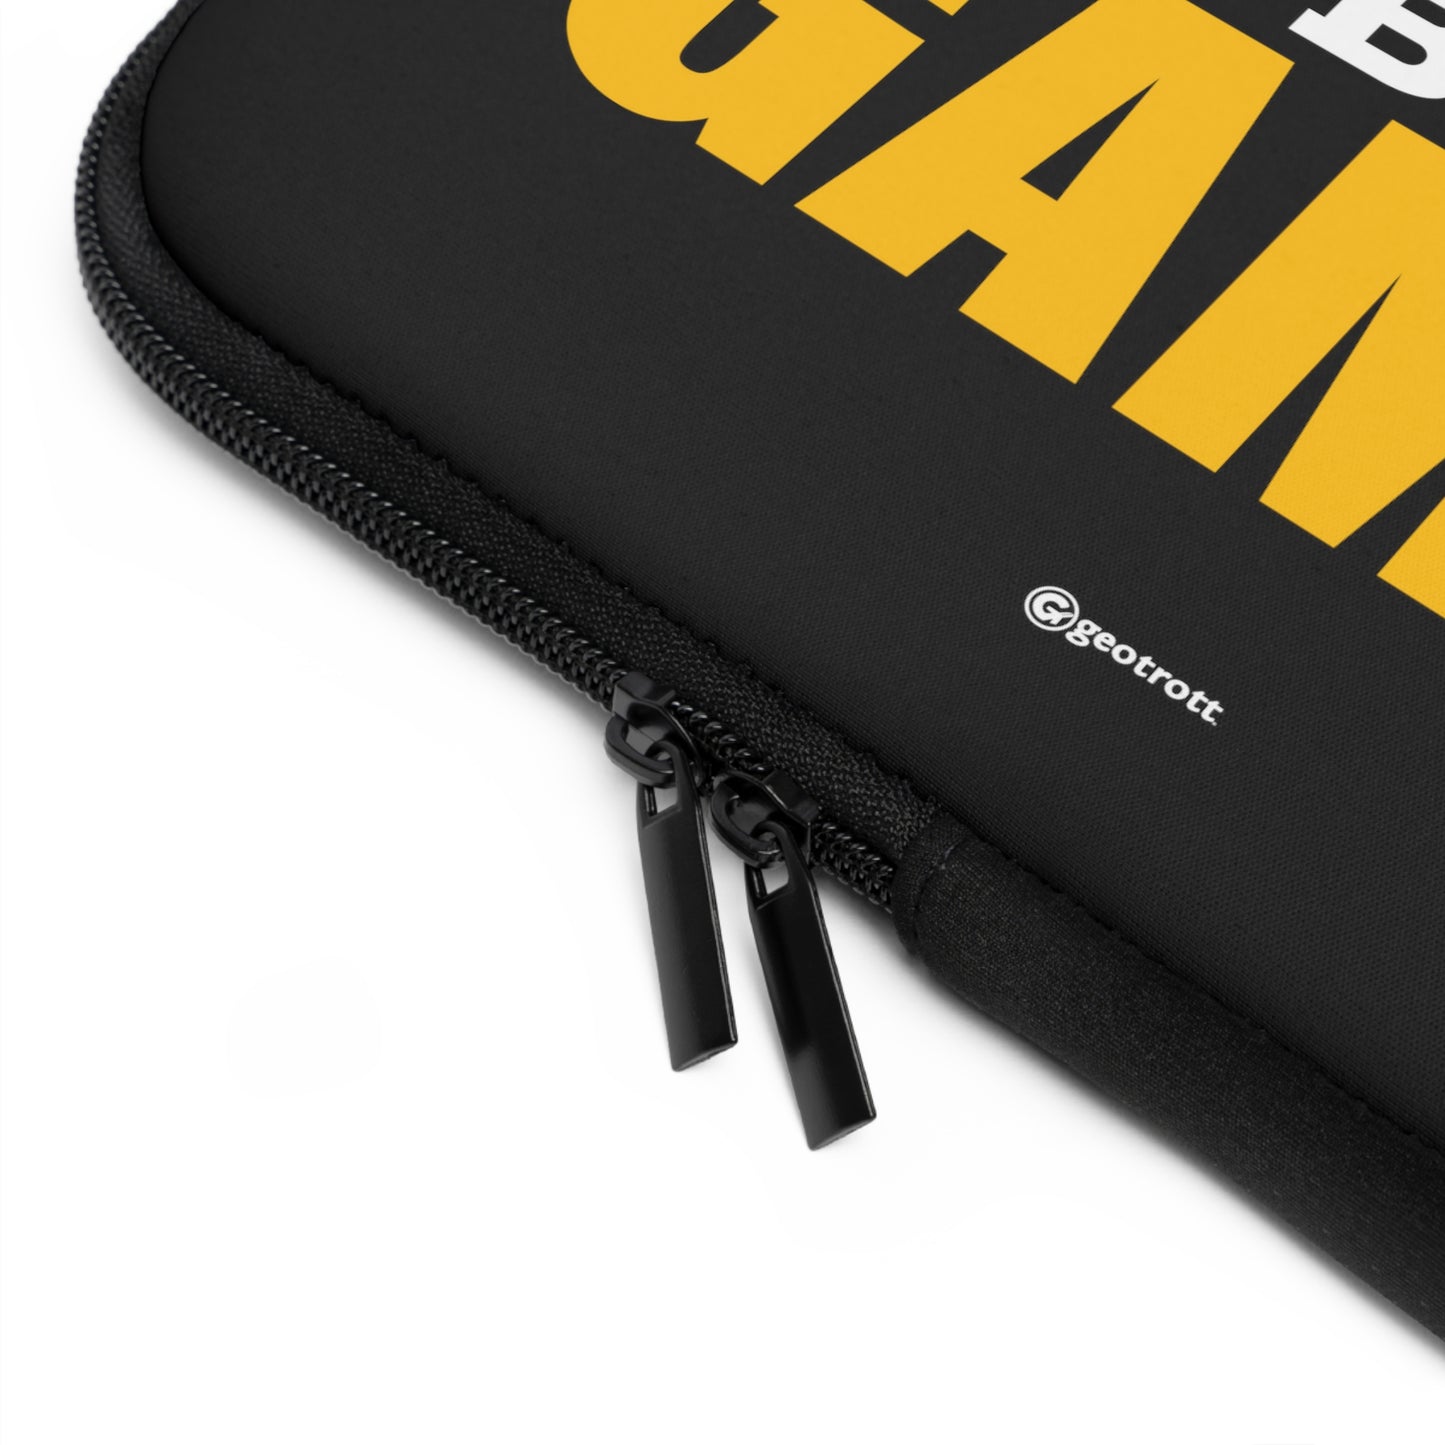 I'm proud to be a Gamer Gamer Gaming Lightweight Smooth Neoprene Laptop Sleeve